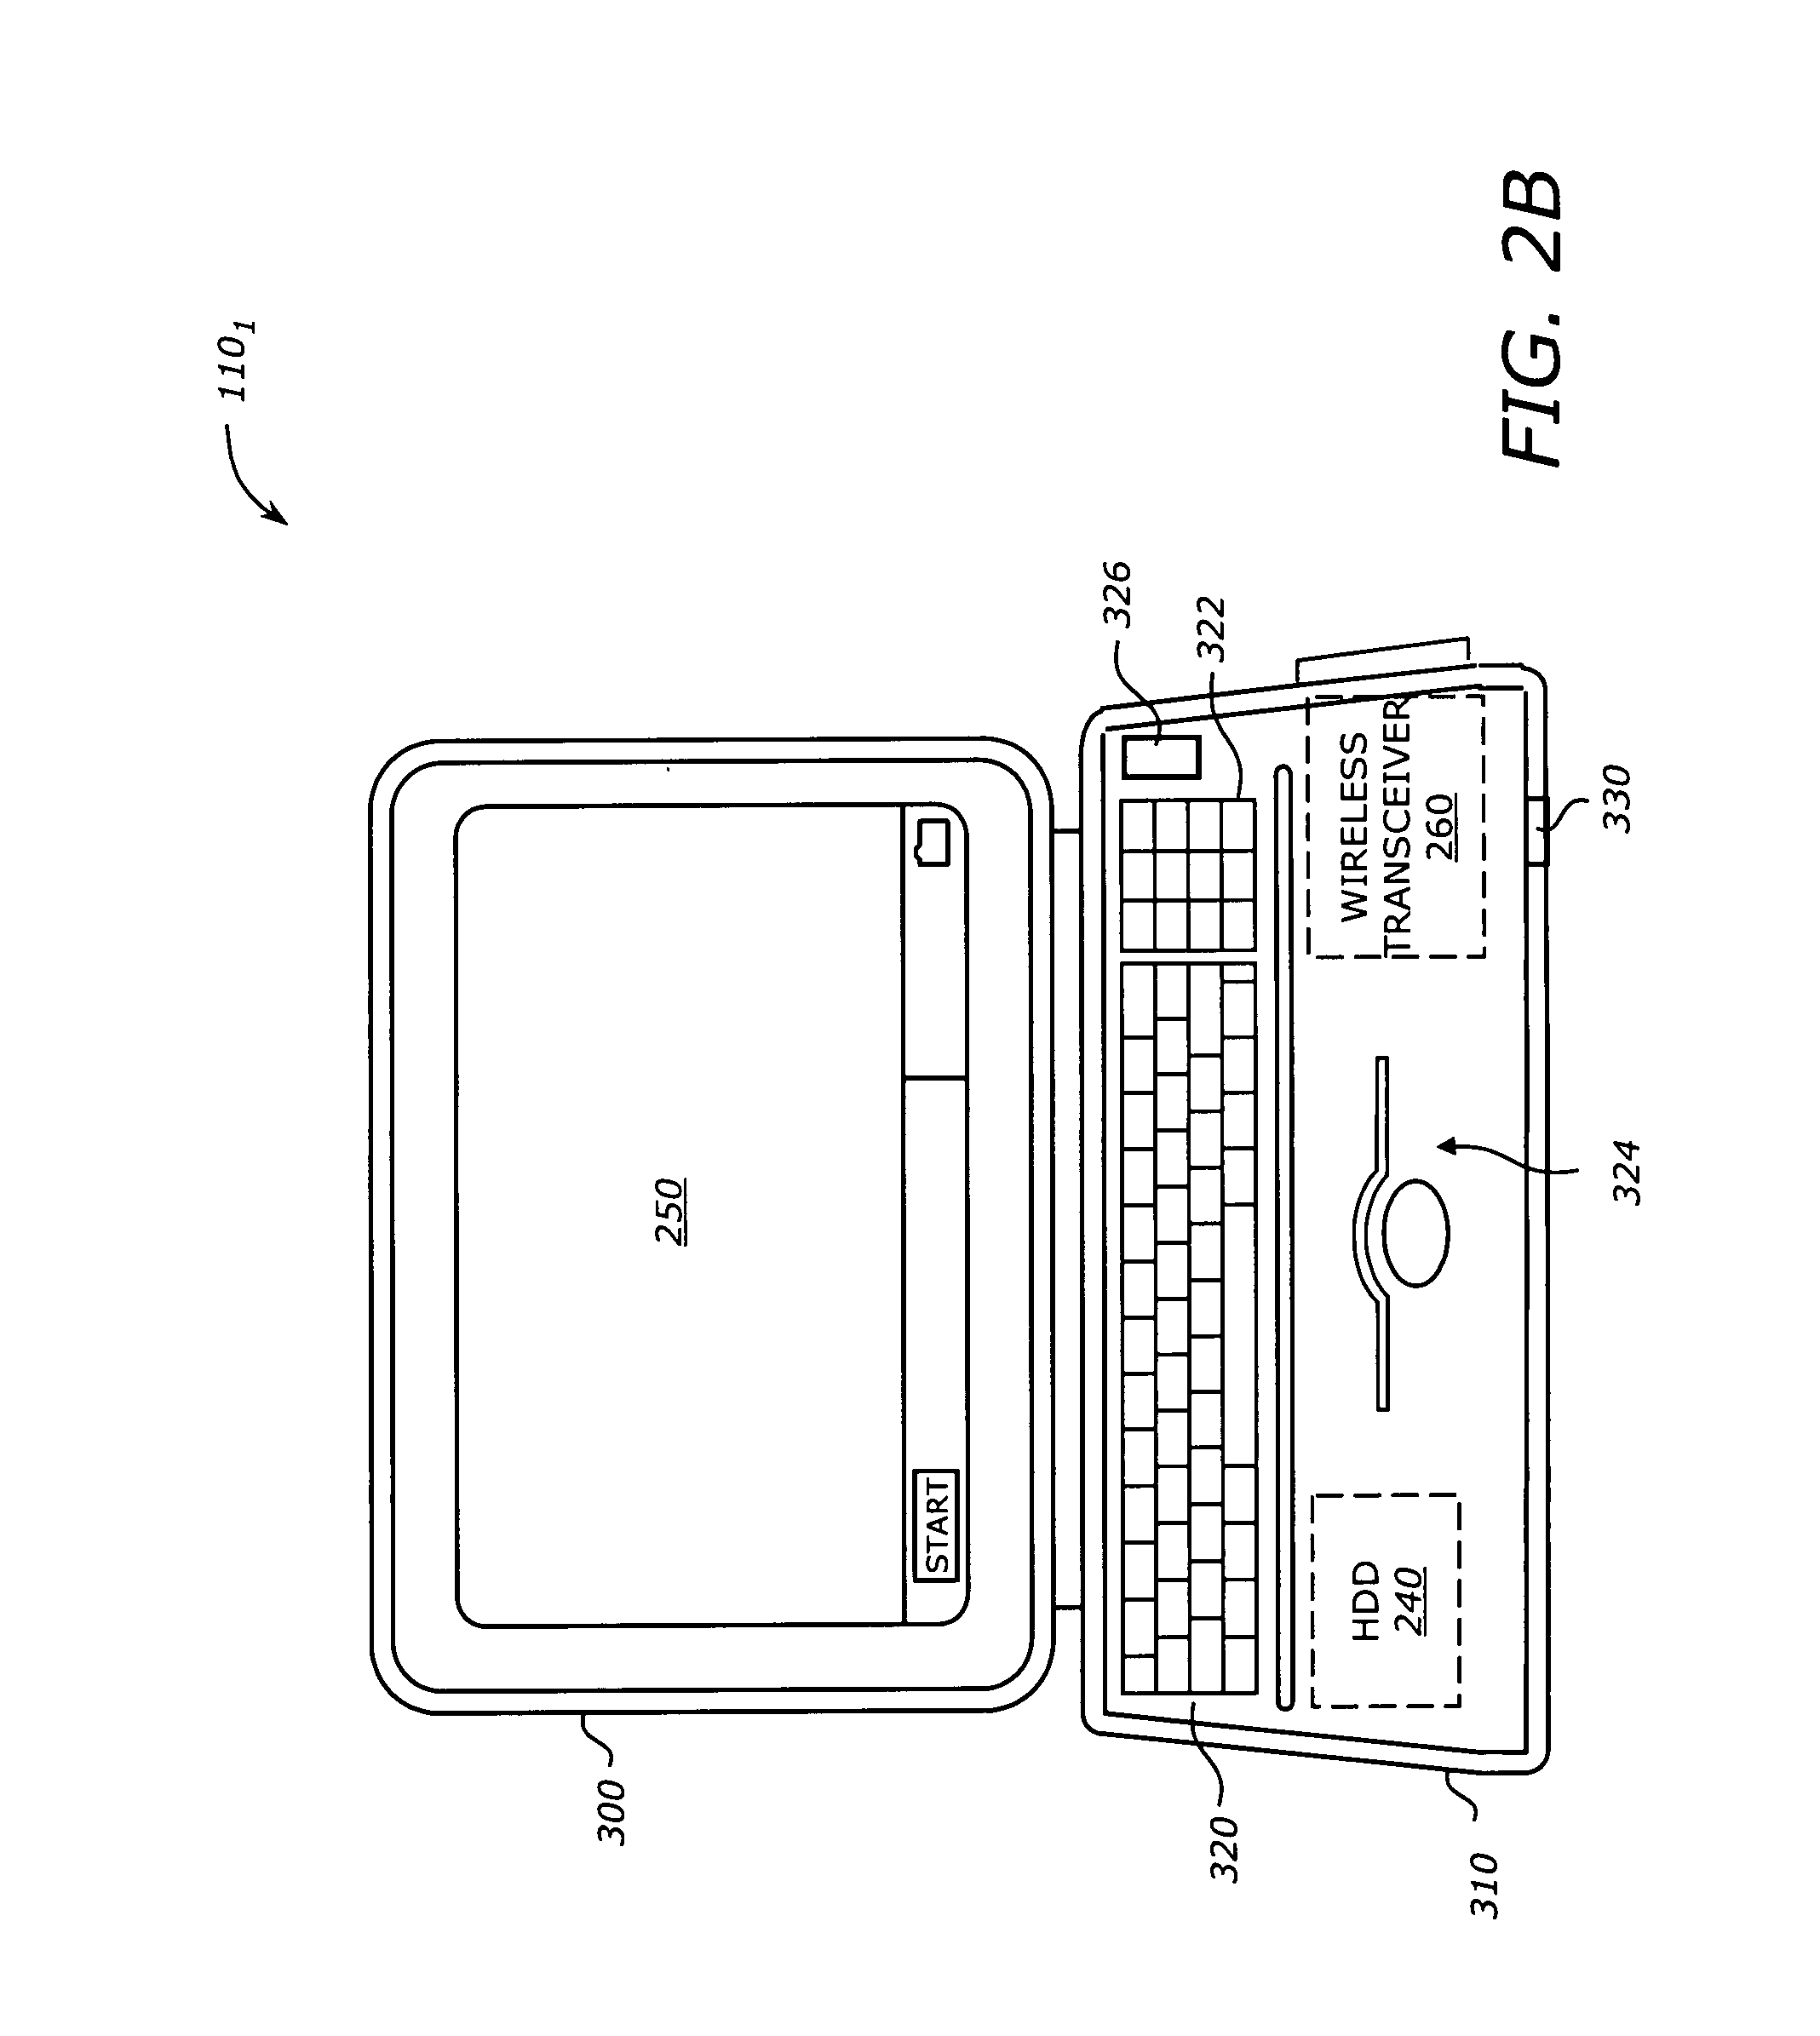 System and method for enhancing security of an electronic device